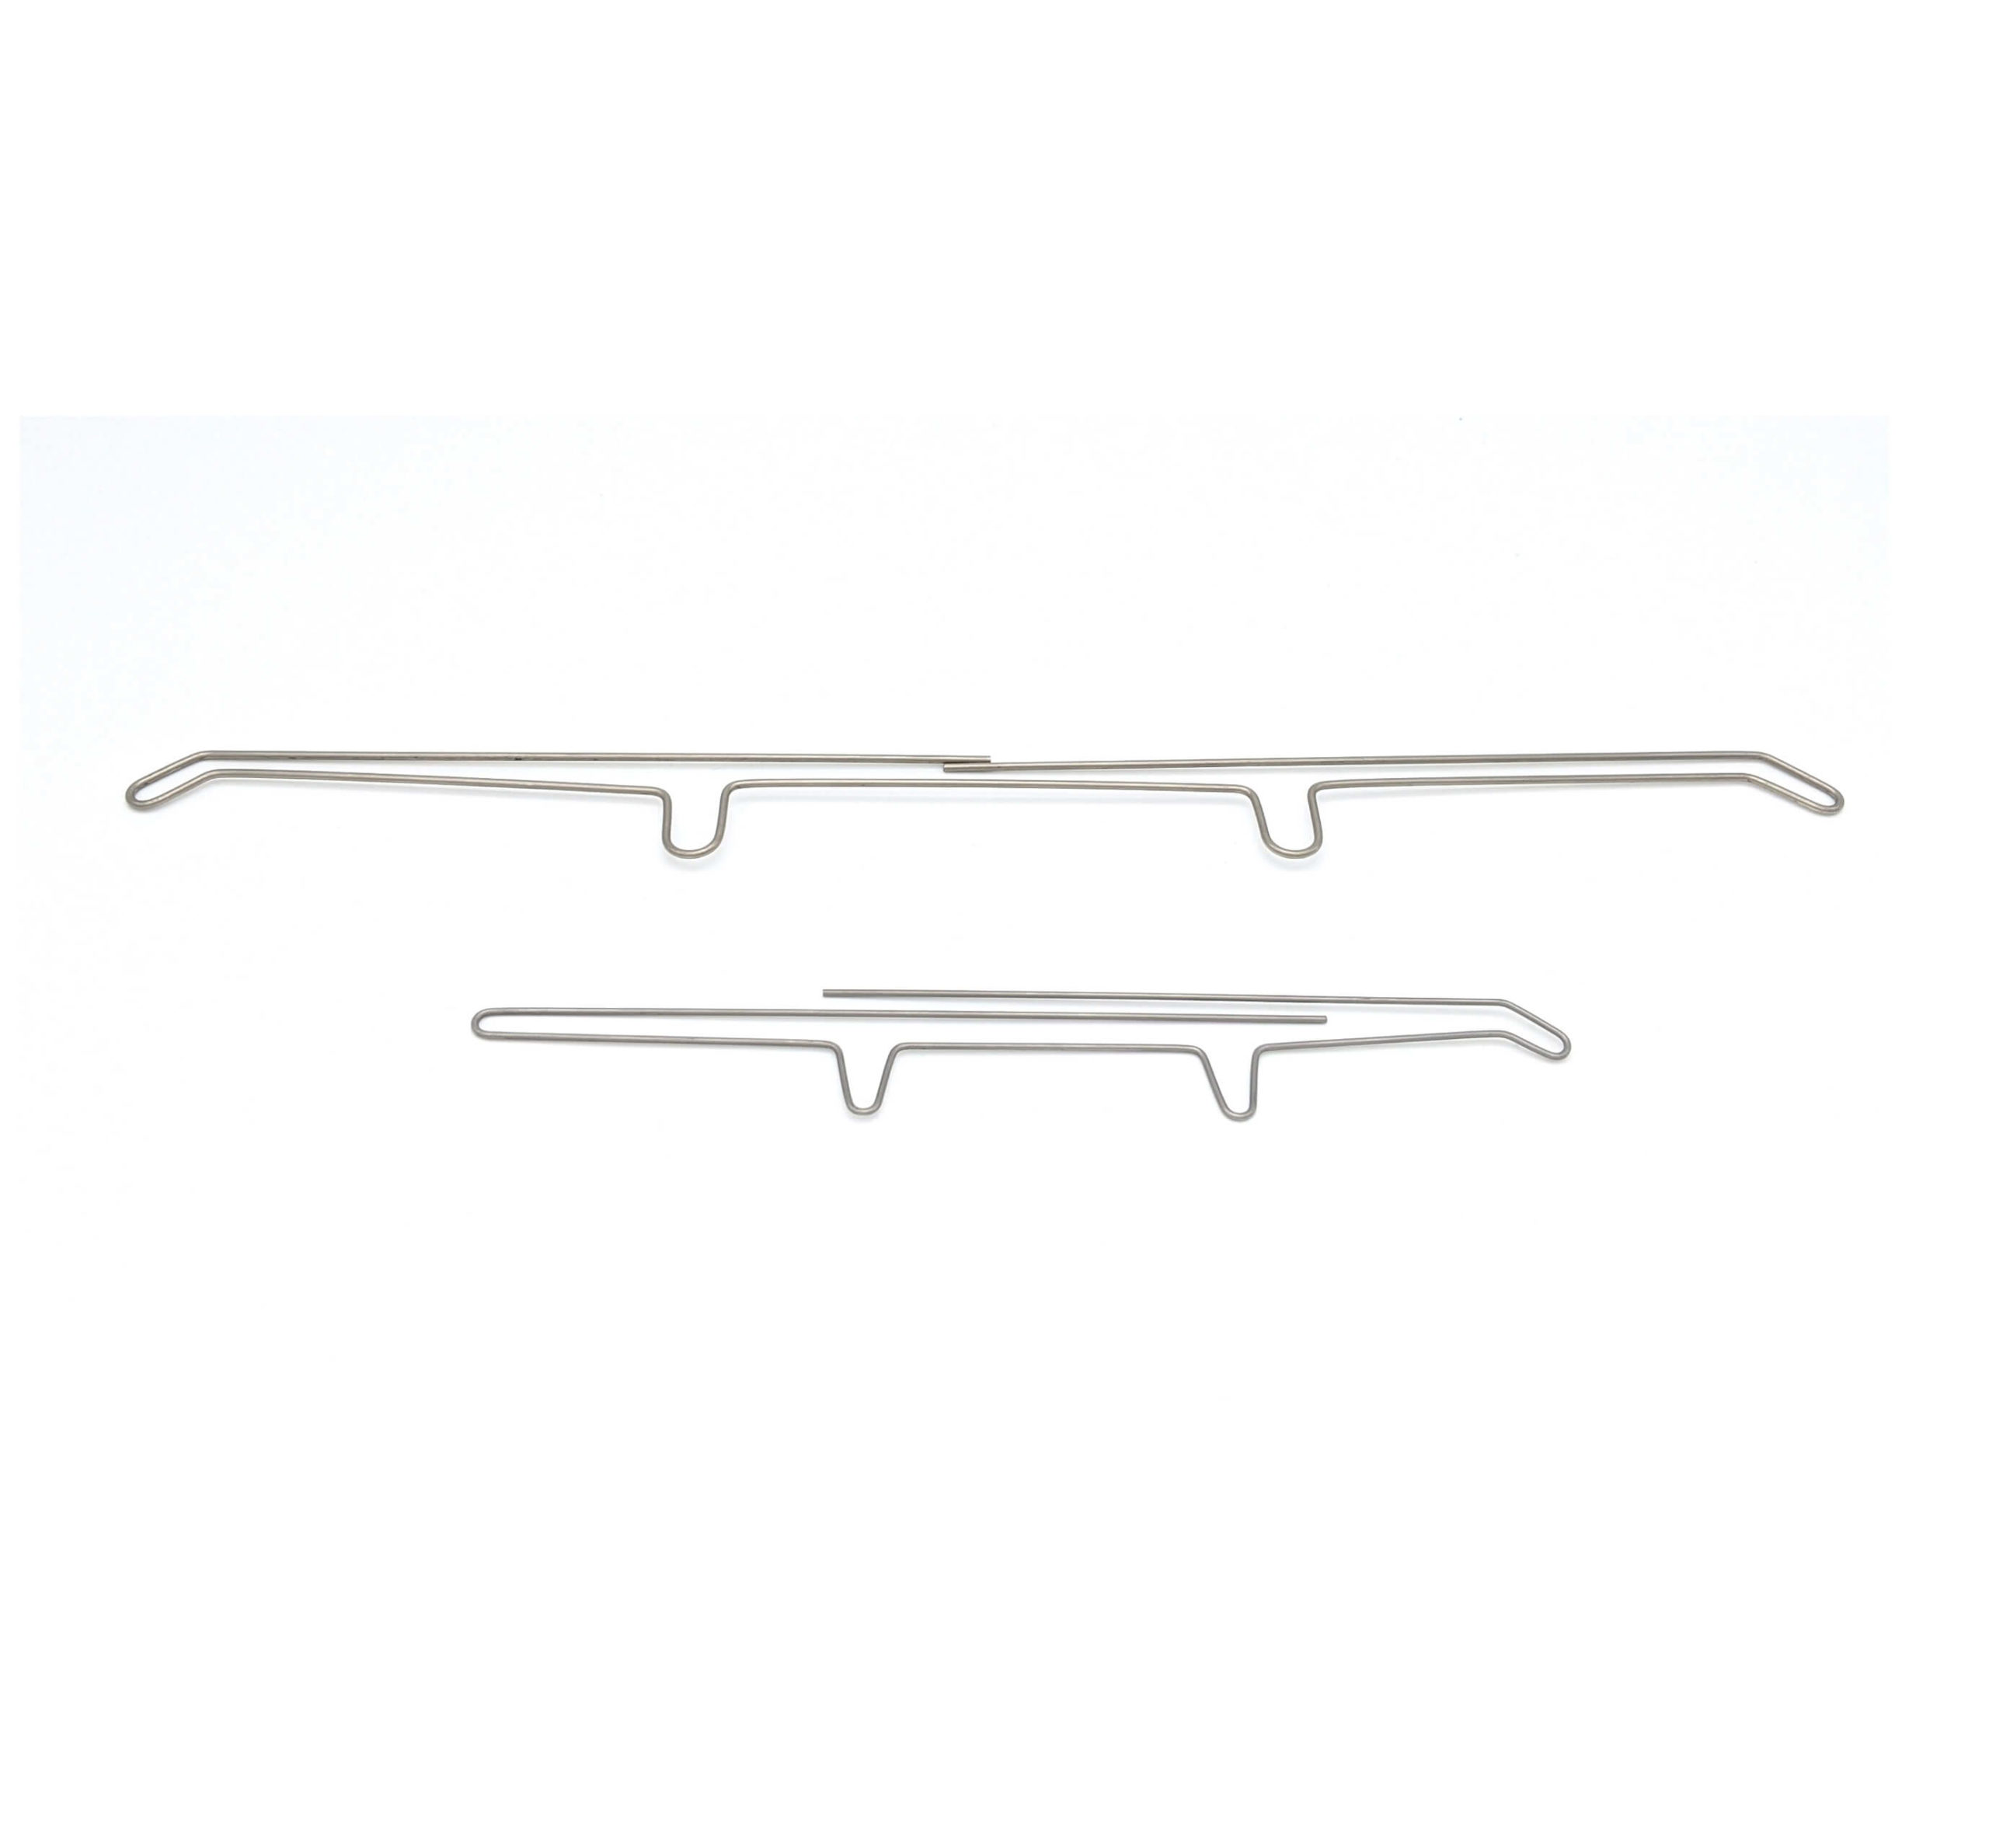 o Large Fishing Lure Body Wire Forms: